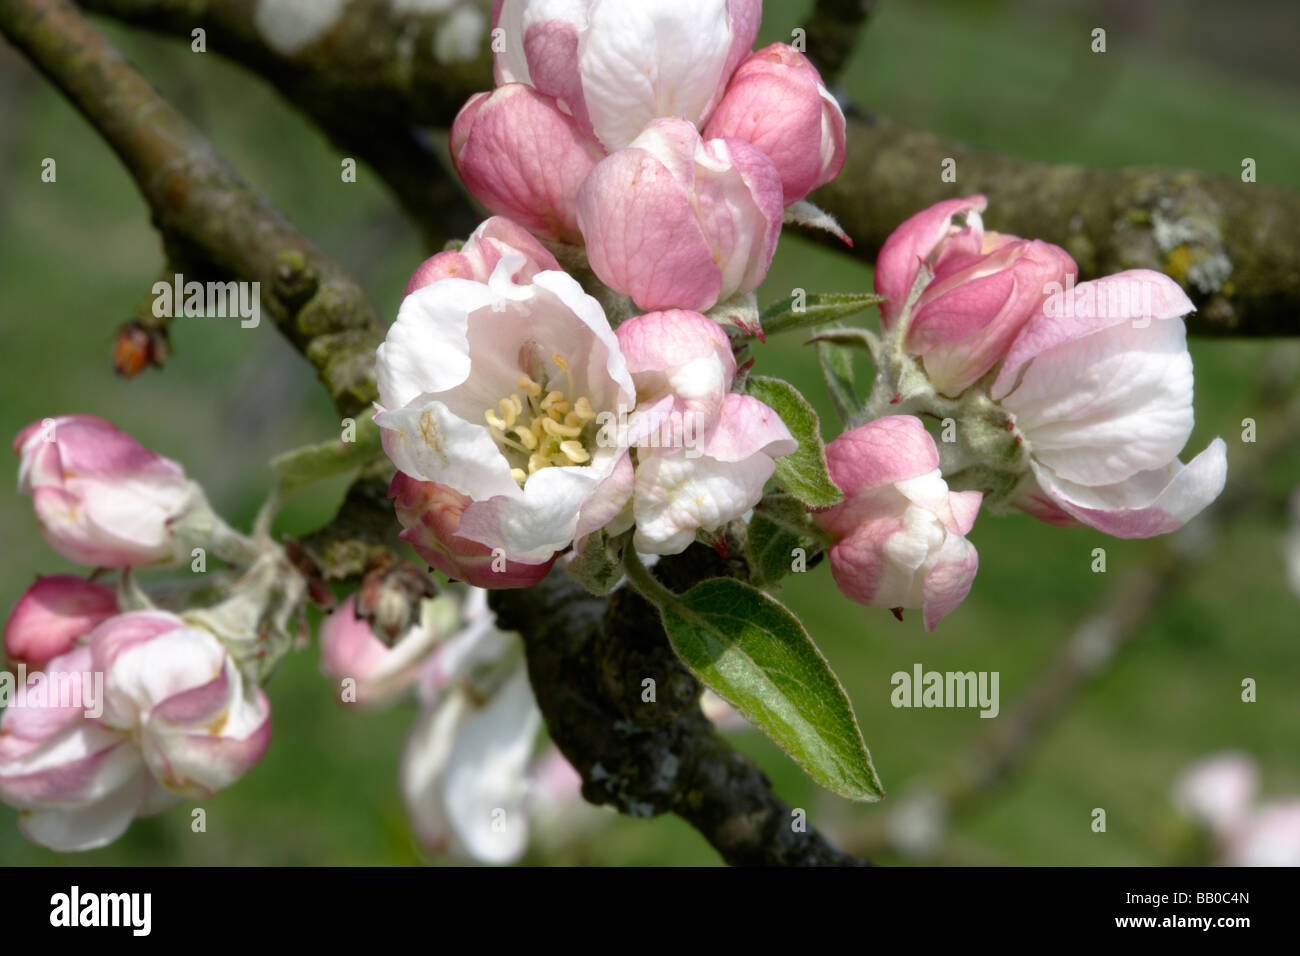 Apple blossom in spring Stock Photo